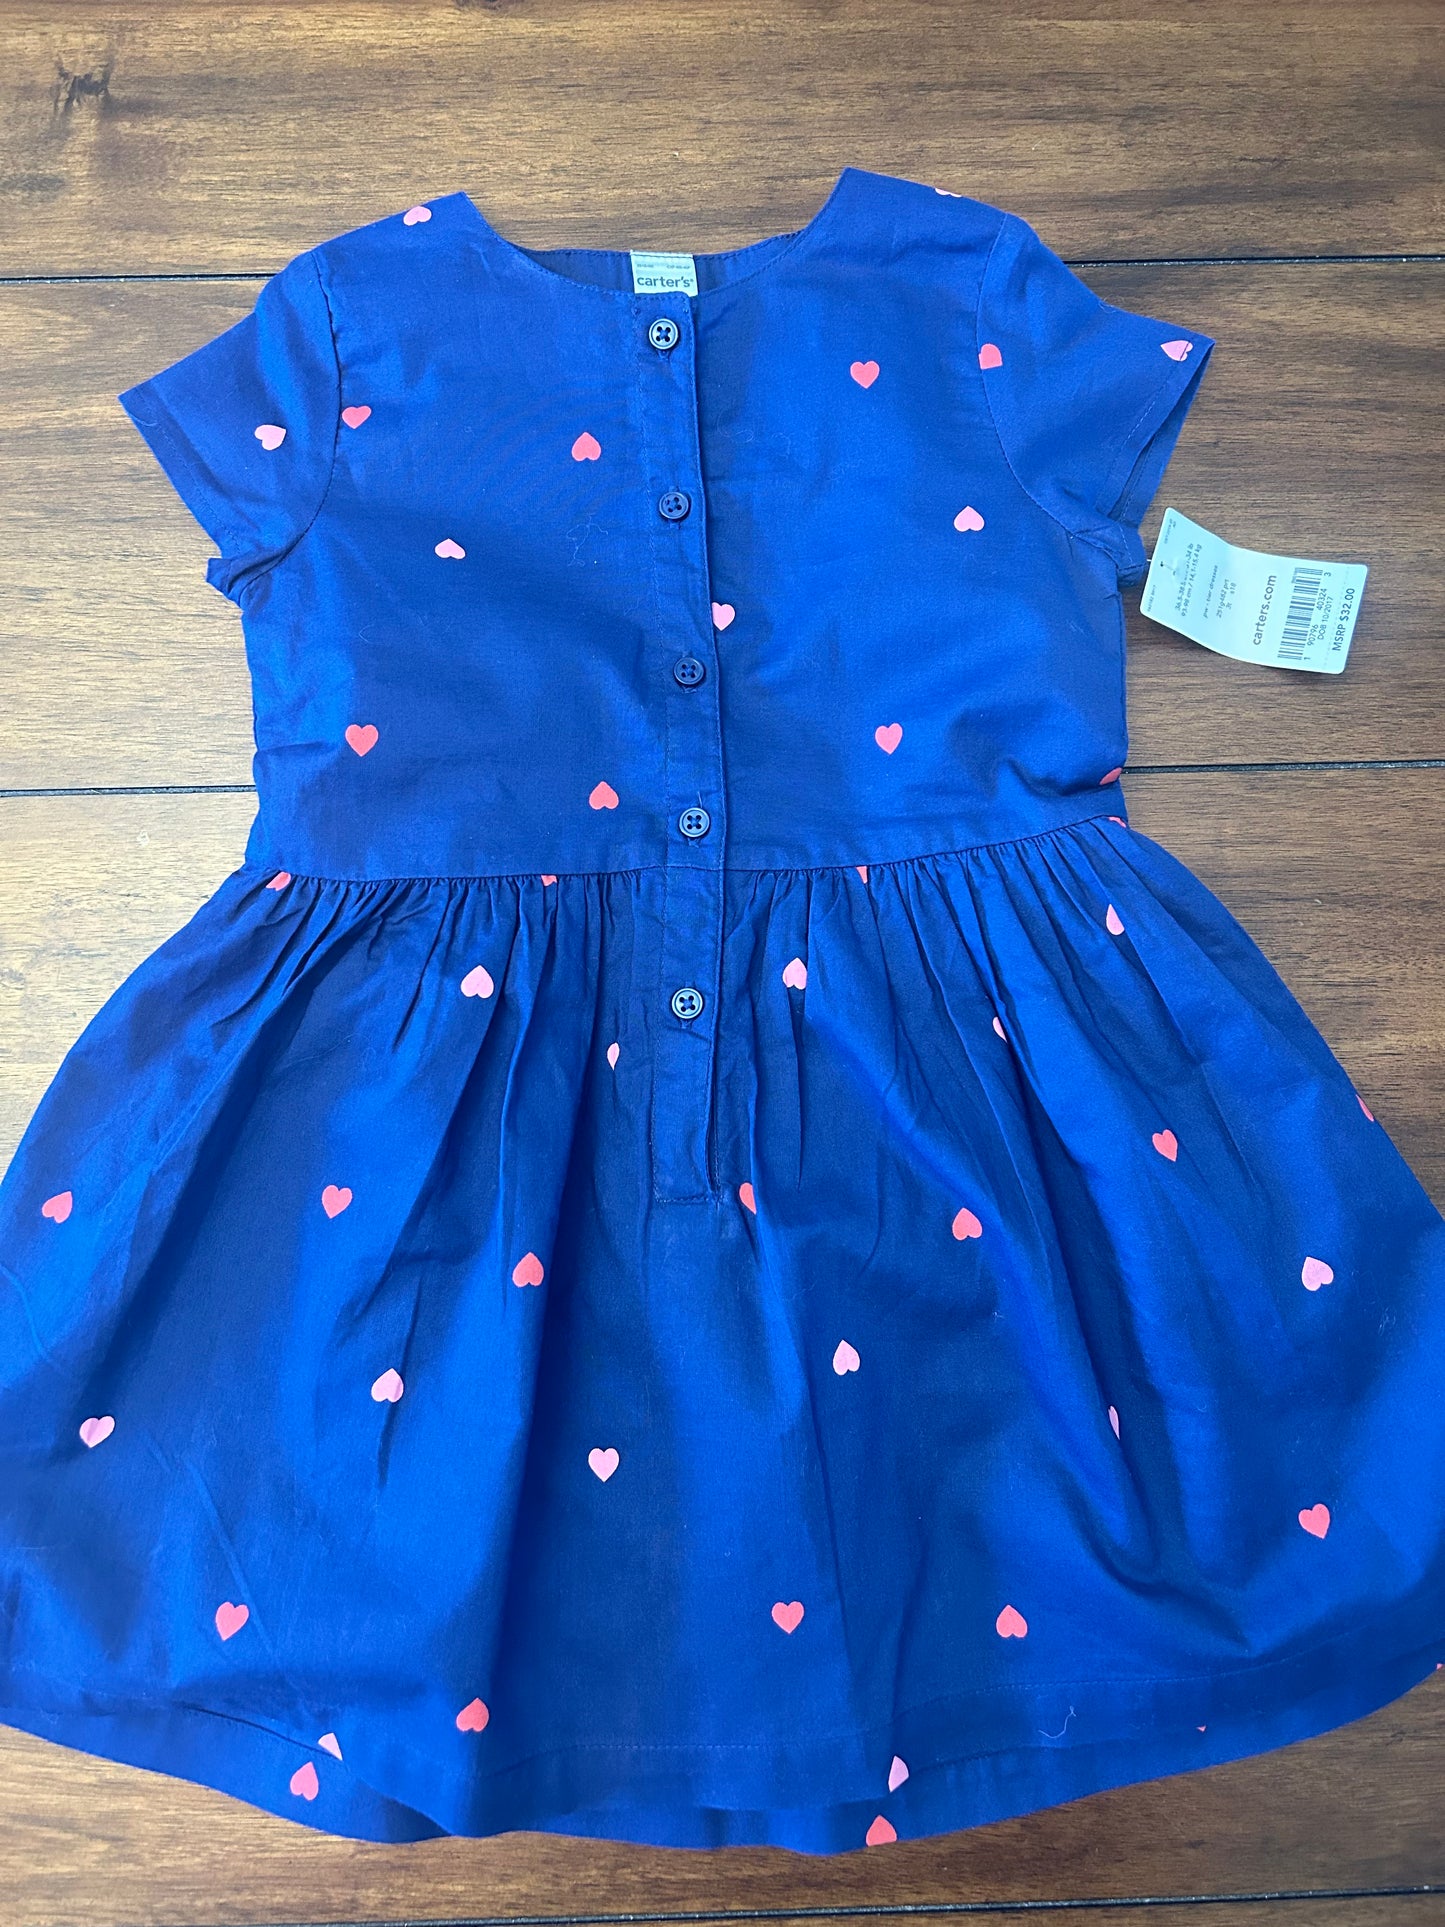 Carter's Girls Navy Dress with Pink Hearts NWT Size 3T  PPU 45040